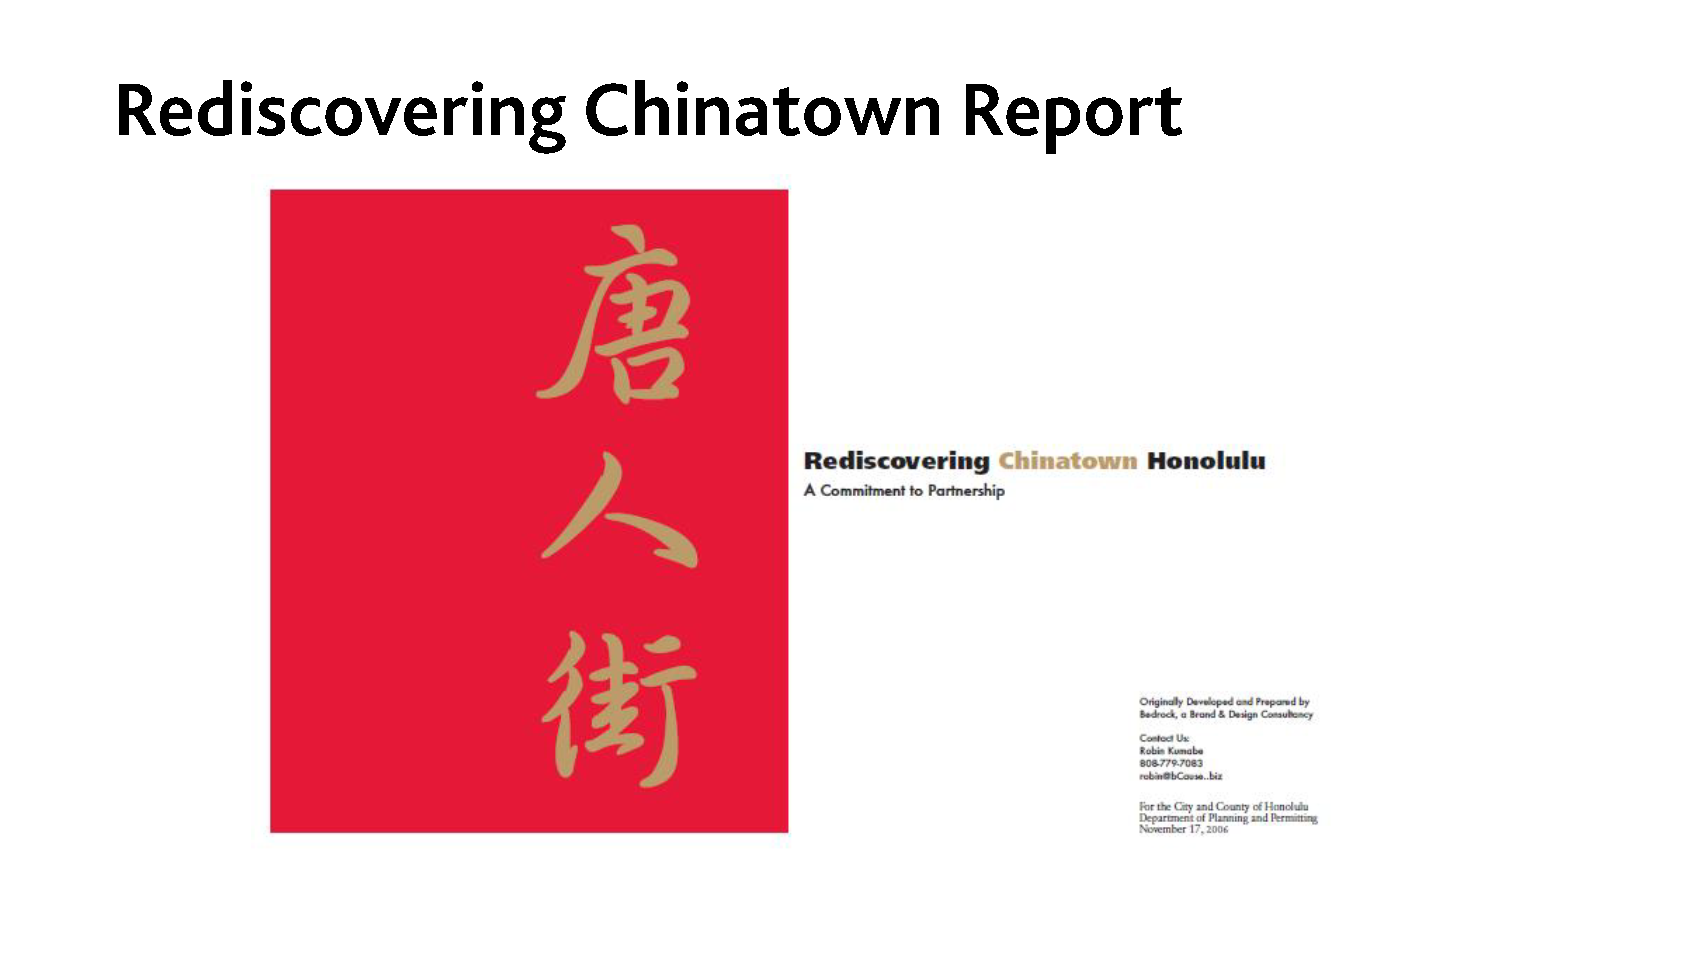 SHADE_PID_ASLA_ Chinatown presentation_150609_Page_12.png